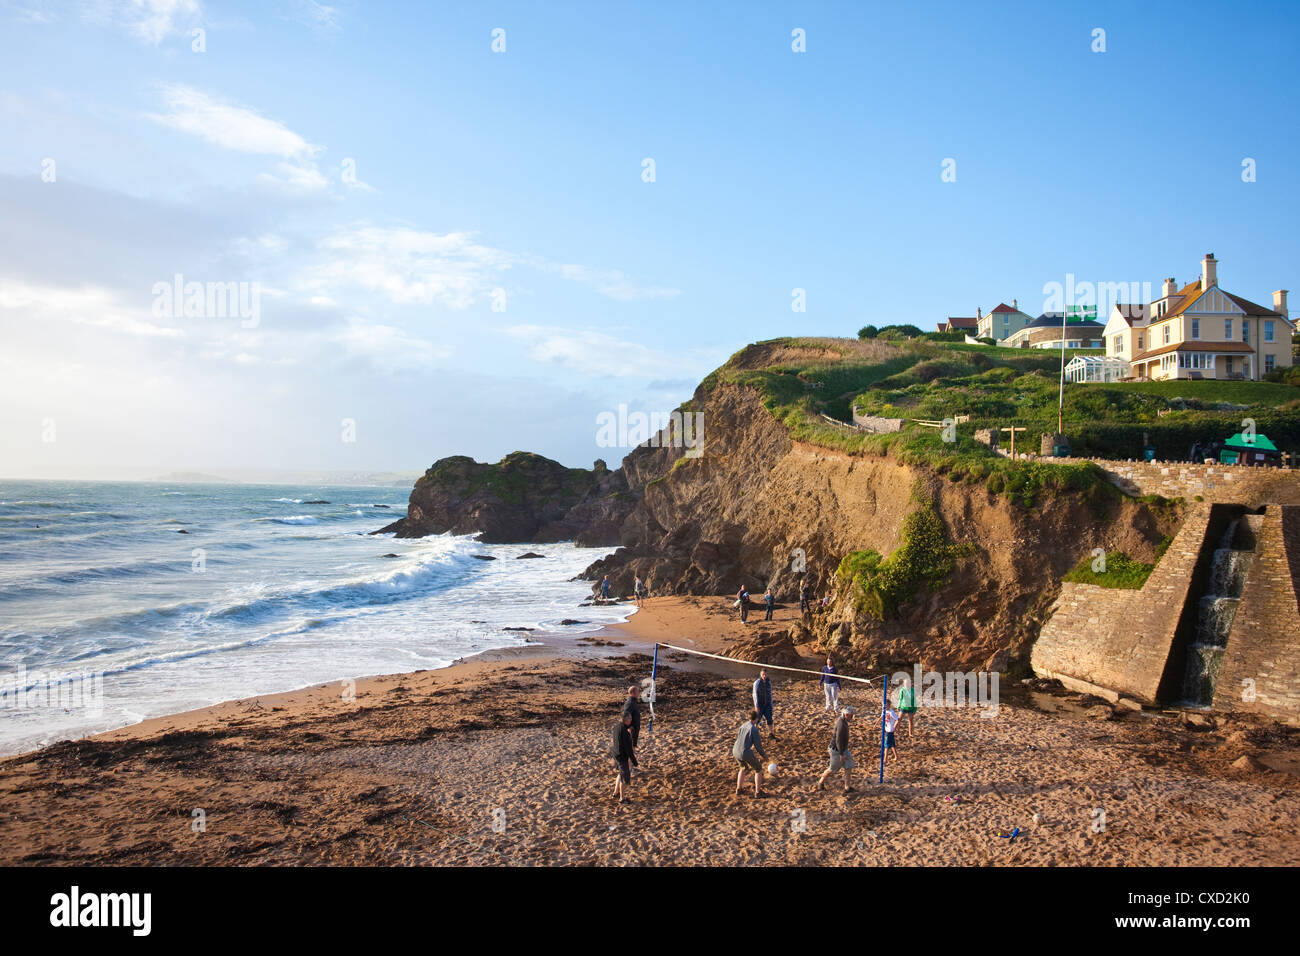 Tourists play volleyball in the evening light on Shippen beach at Outer Hope, Hope Cove, South Hams, Devon, England, UK Stock Photo